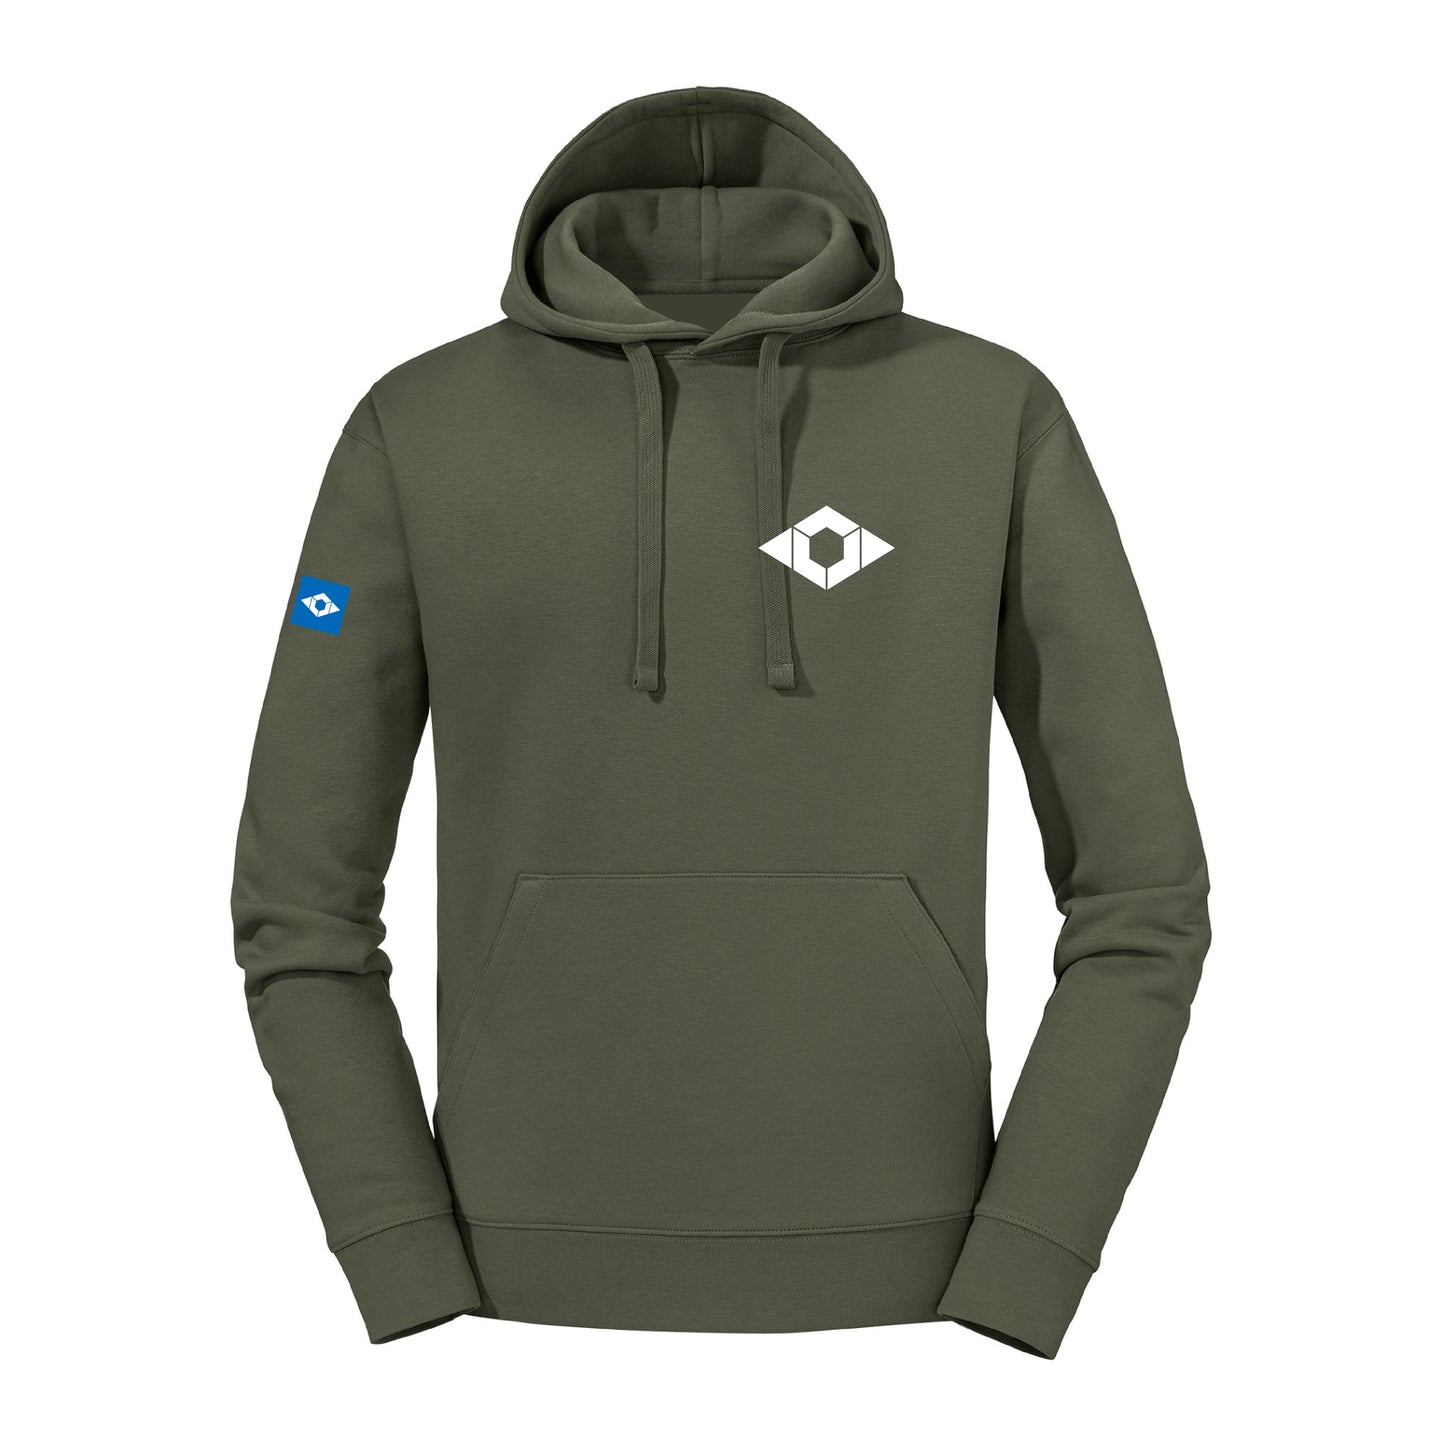 Union of Forces Hoodie